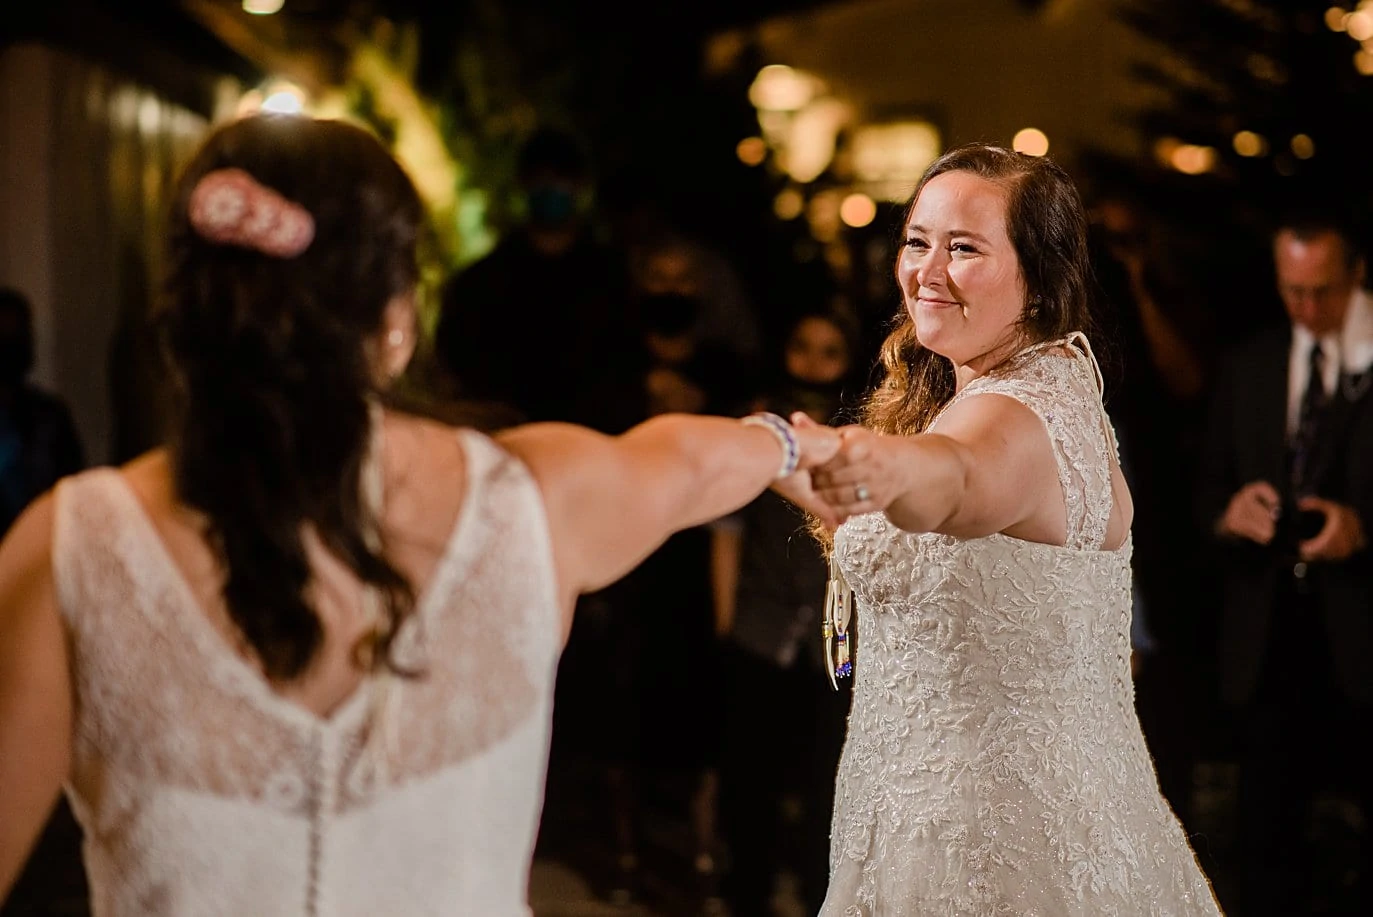 first dance on patio under market lights for two brides at Deer Creek Valley Ranch same-sex wedding by Denver LGBT wedding photographer Jennie Crate